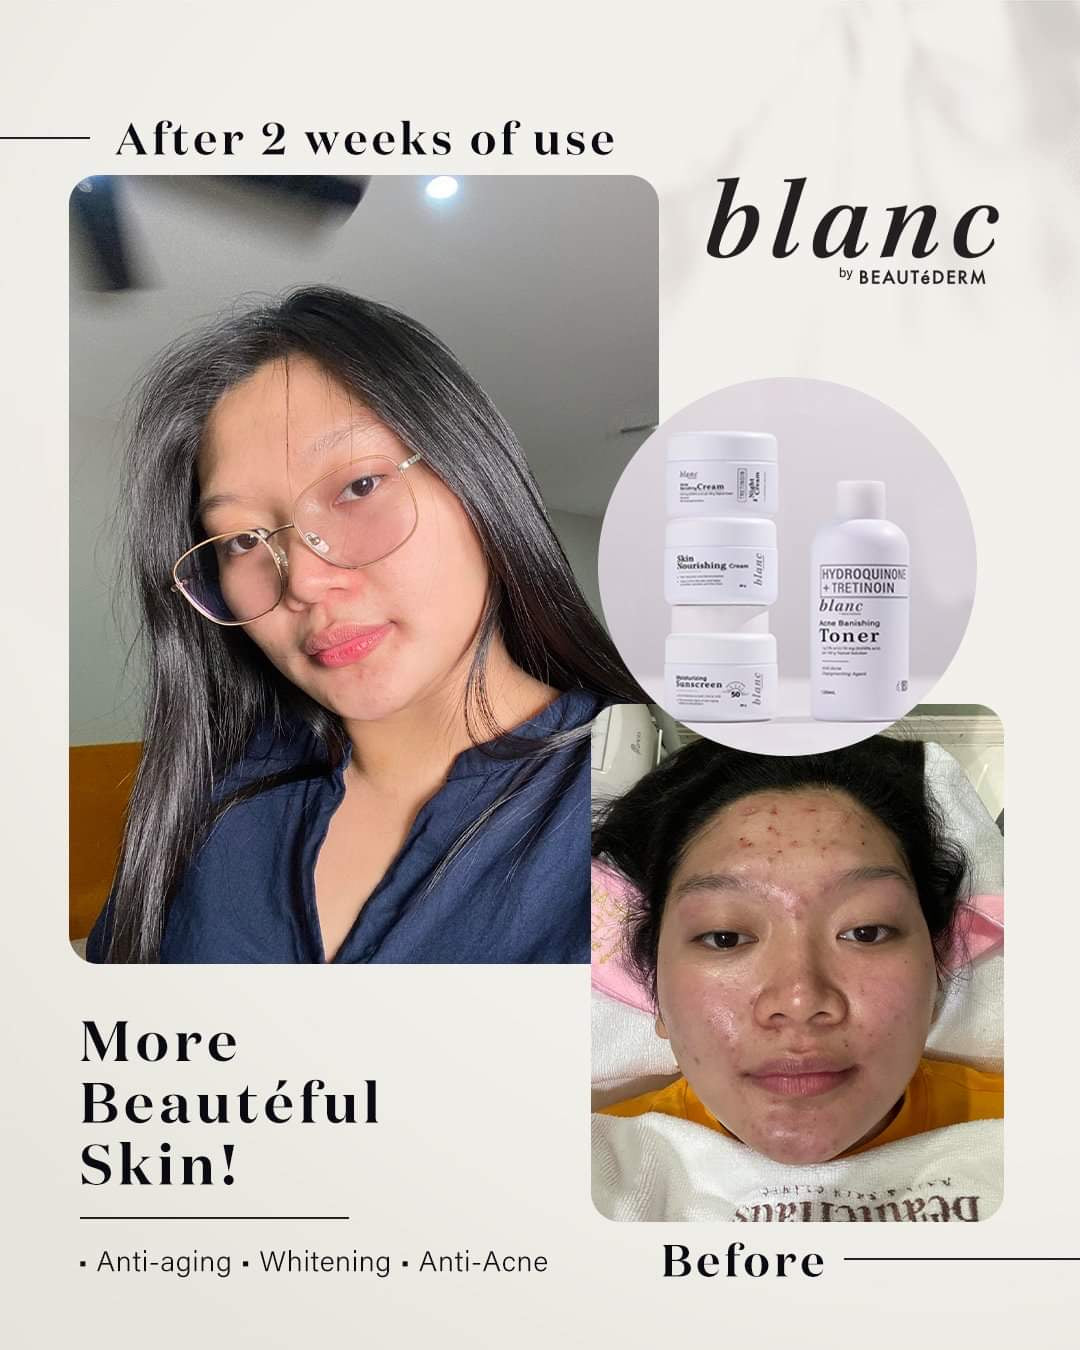 Blanc Set (120 ml Toner and 20gm creams, good for 2 months use) with FREEBIES